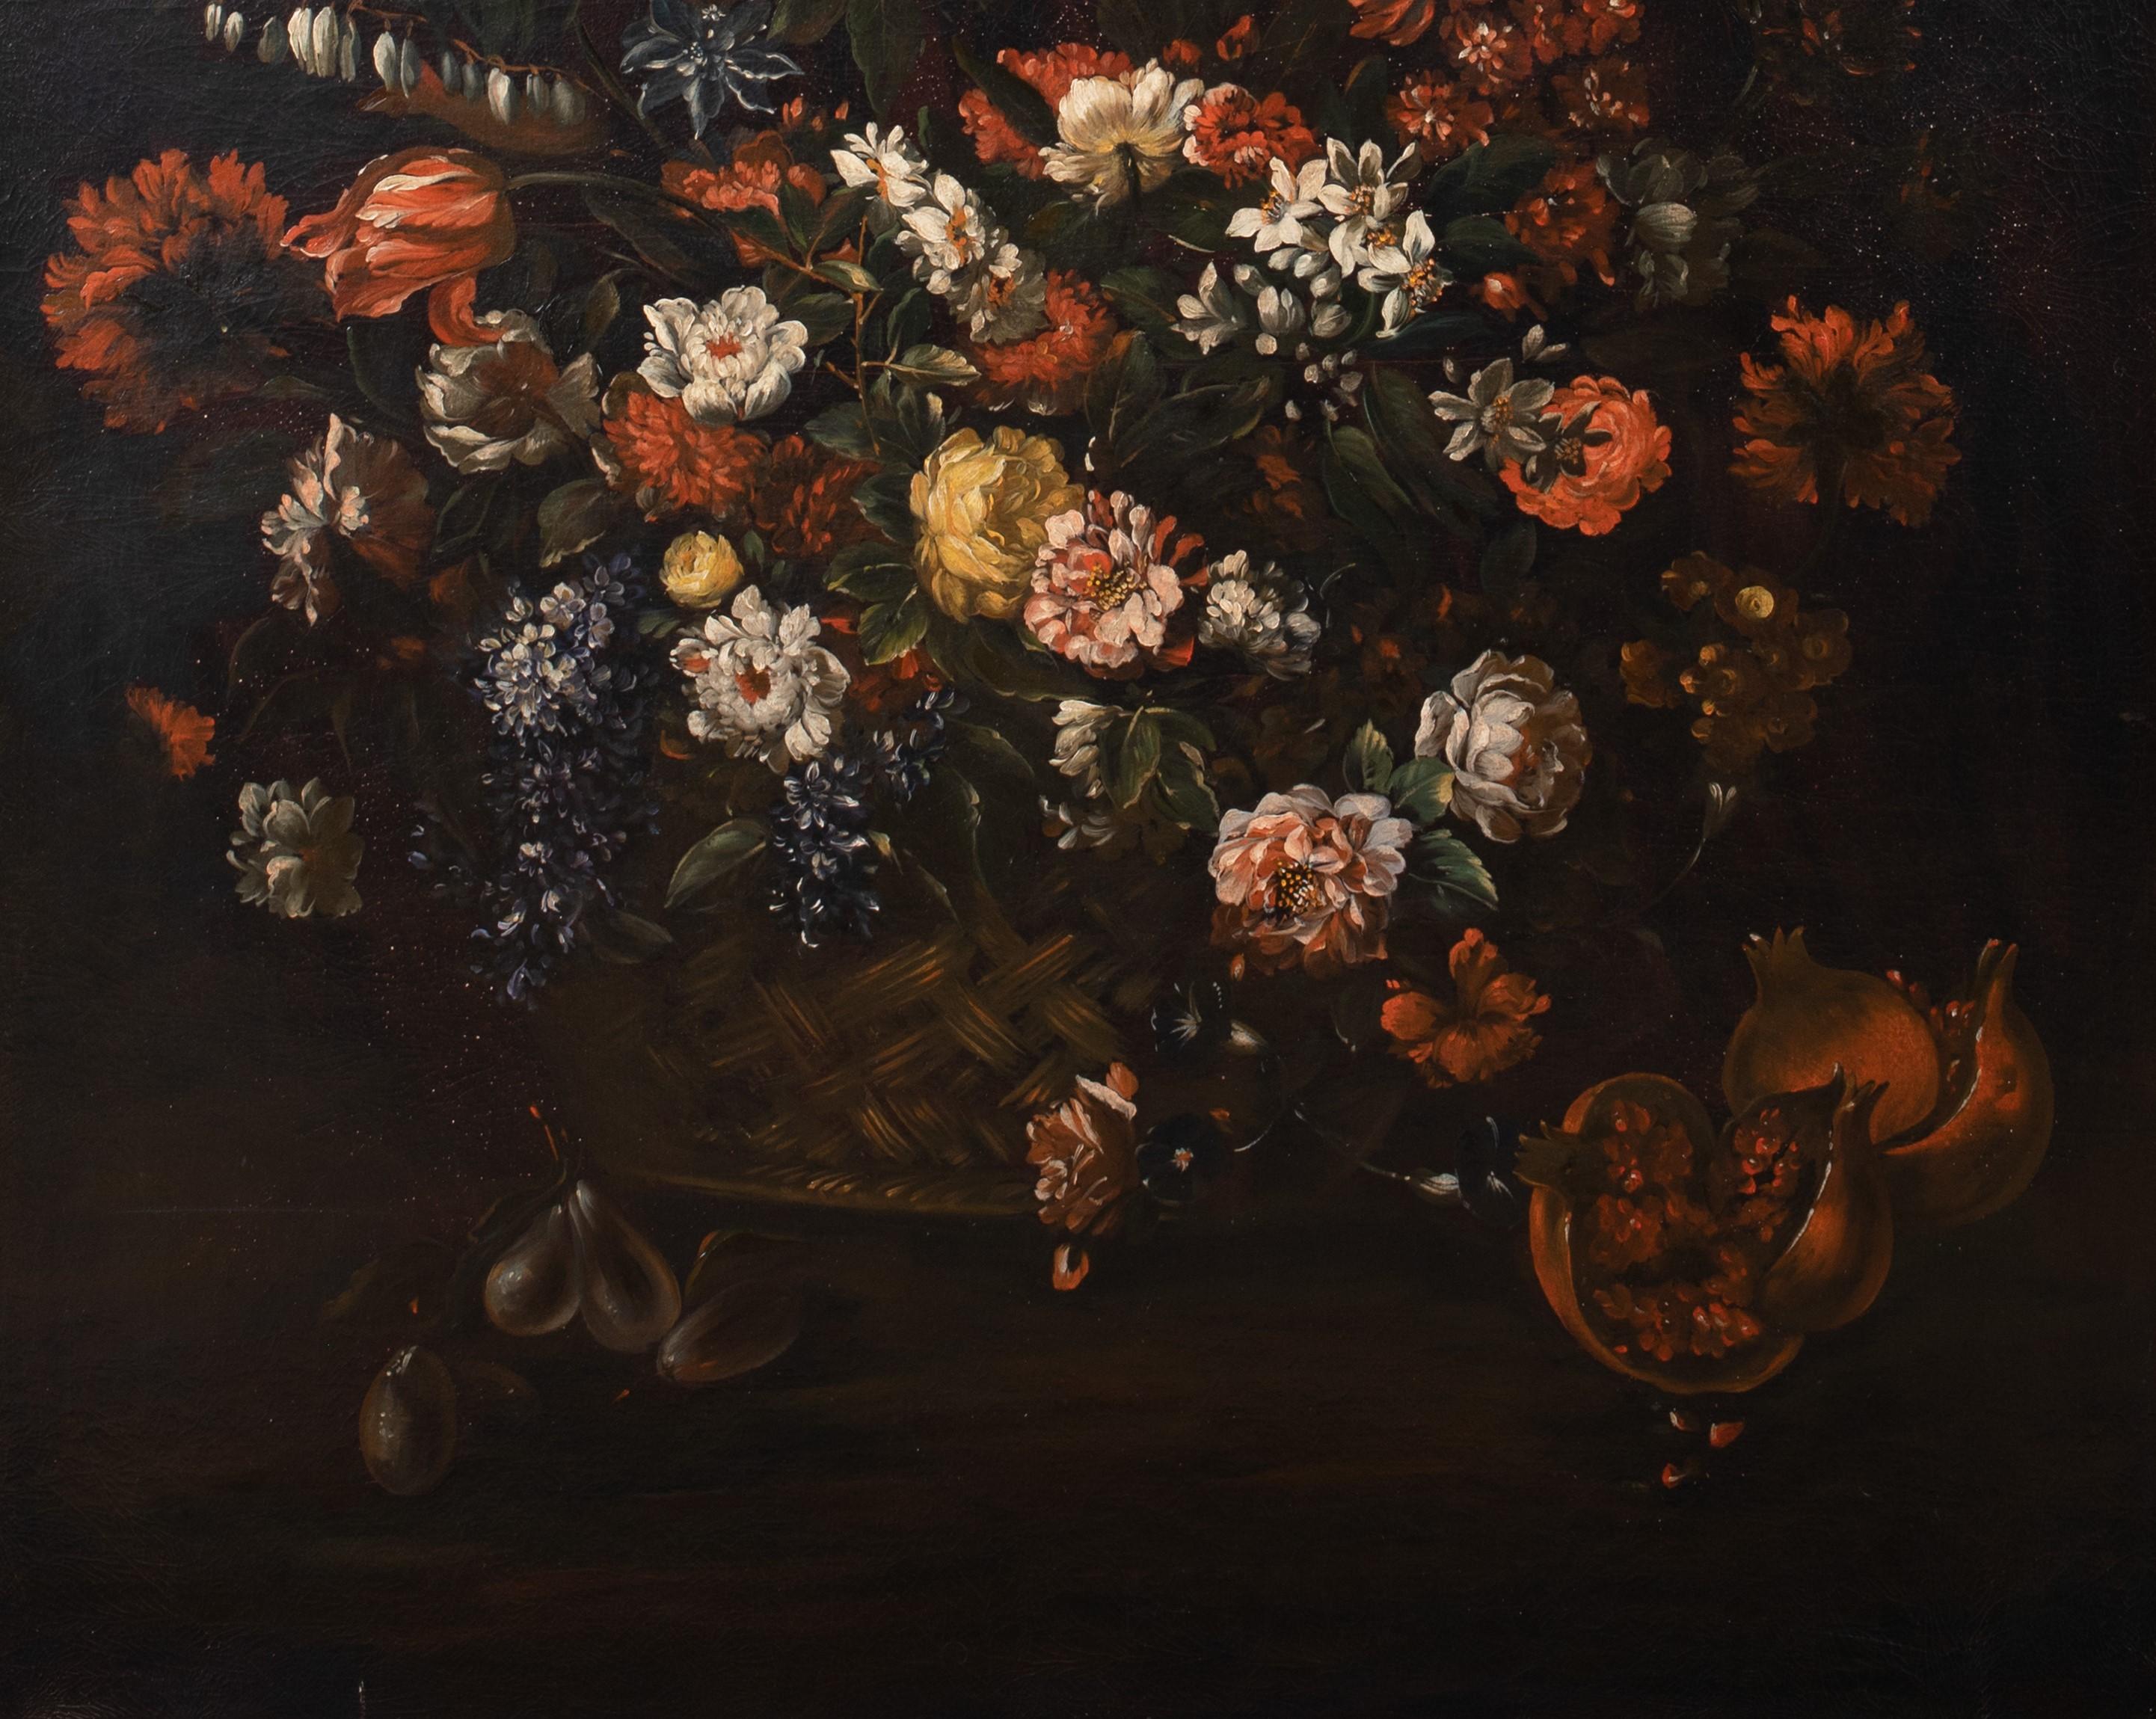 Still Life Of Flowers & Fruit, circa 1700

circle of Andrea I SCACCIATI (1642-1710) 

Huge circa 1700 Italian Old Master still life of flowers including peony, tulips and lilacs in a basket on a ledge with pomegranates and plums, oil on canvas. Rare